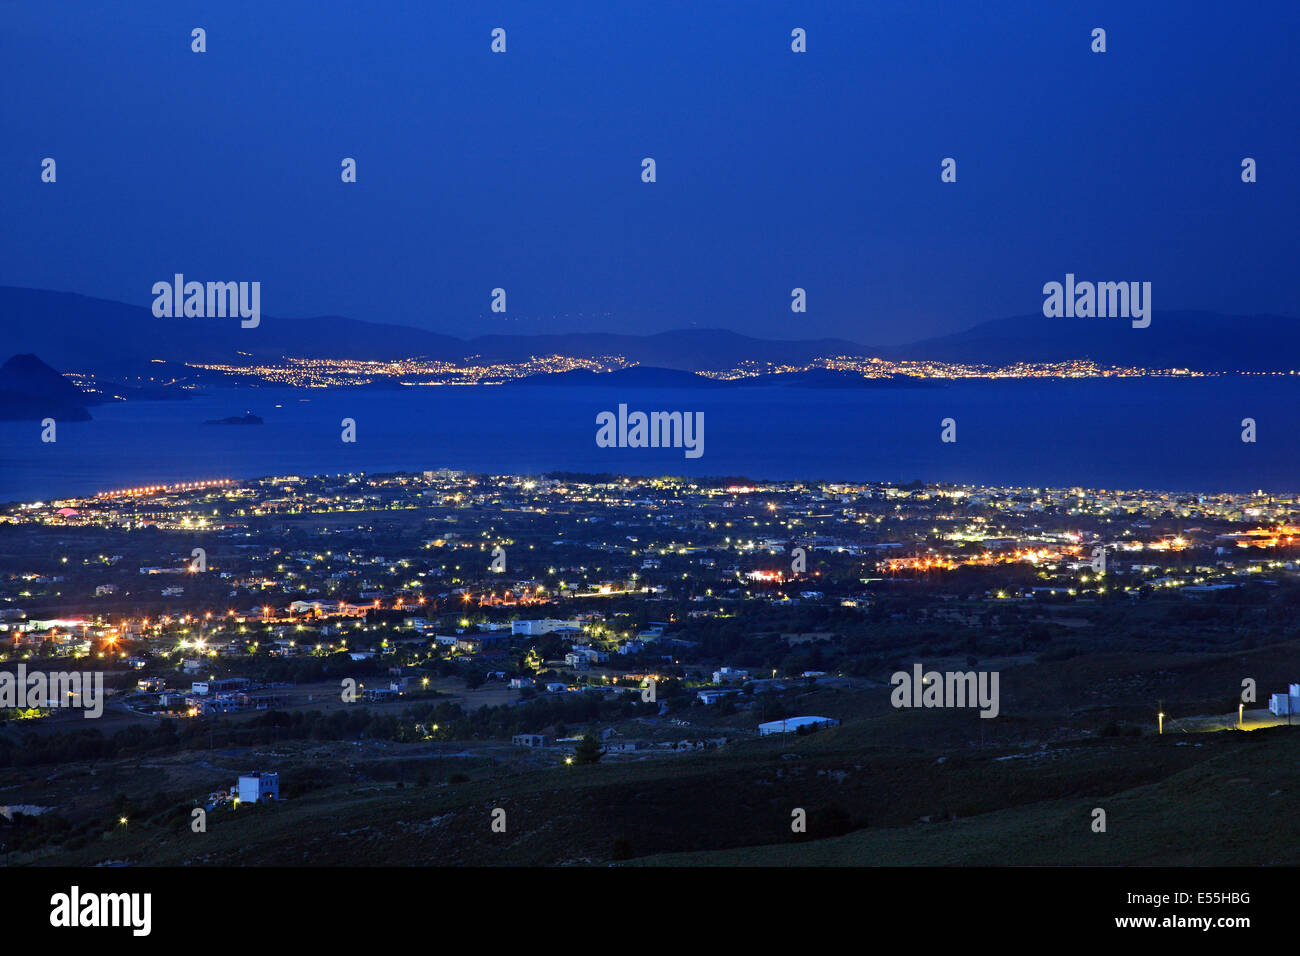 Night view of Kos town, Kos island, Dodecanese, Aegean sea, Greece. In the background the Turkish coast. Stock Photo